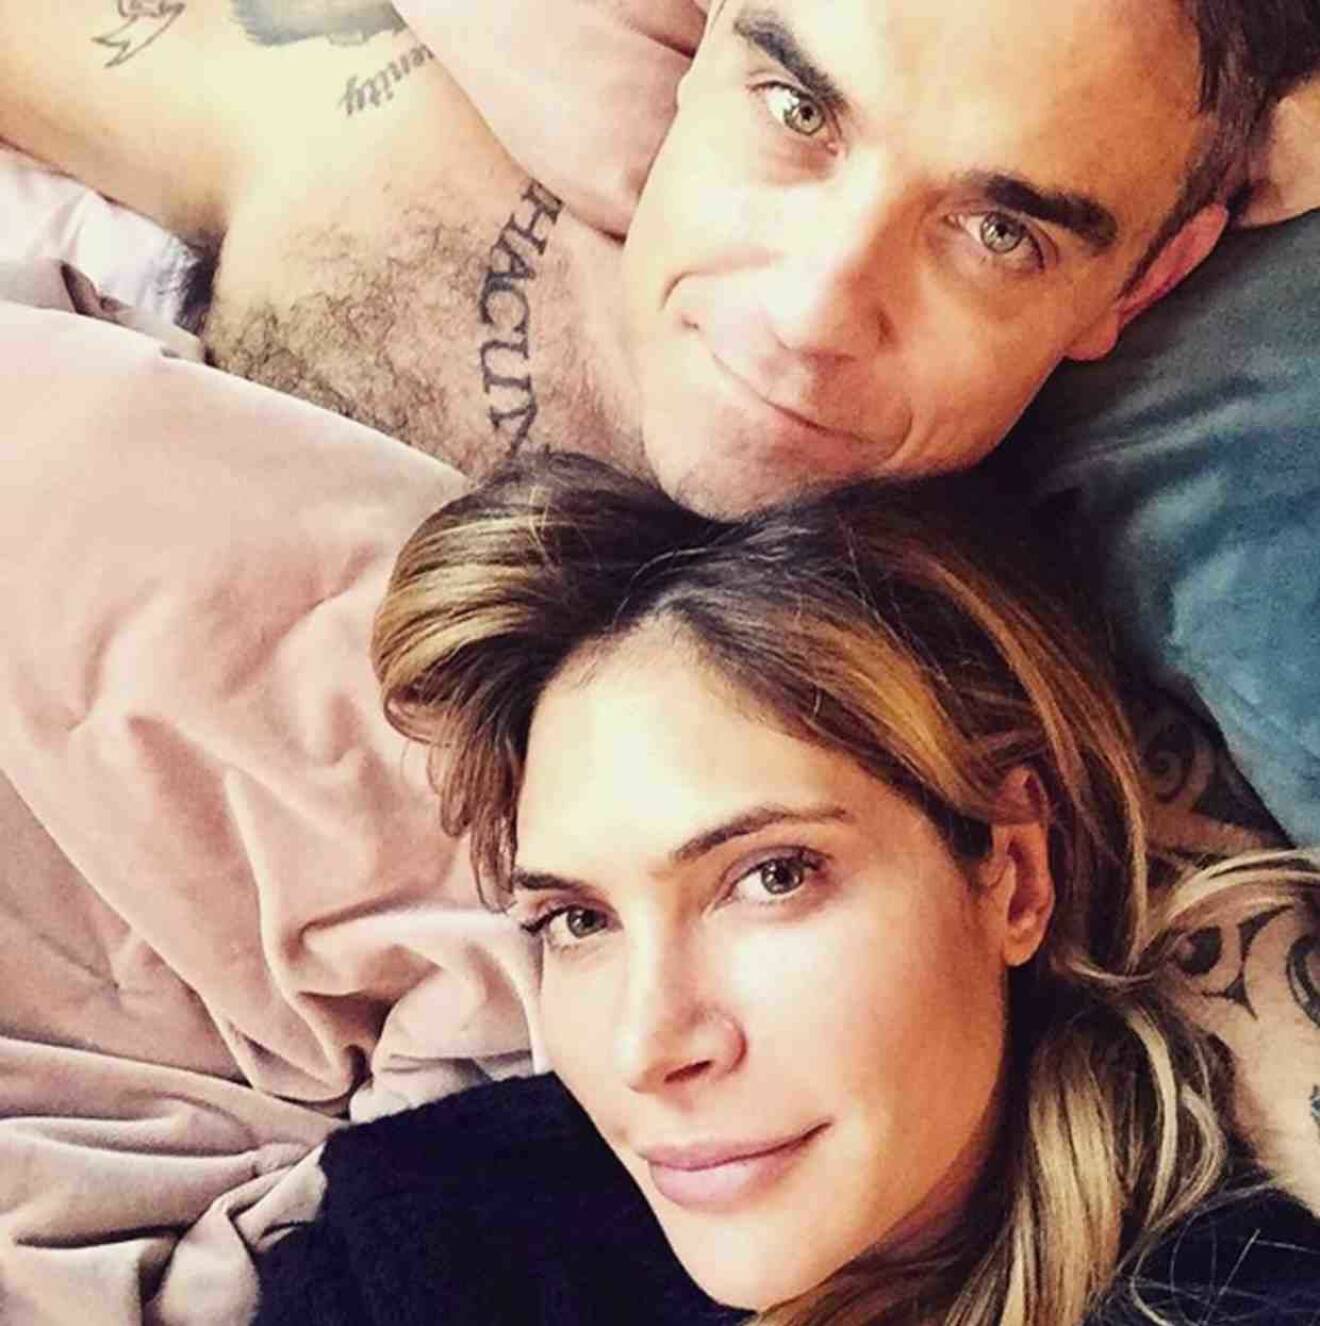 EROTEME.CO.UK FOR UK SALES: Contact Caroline 44 207 431 1598 Picture shows: Robbie Williams and Ayda Field. NON-EXCLUSIVE Friday 4th November 2016 Job: 161104UT2 London, UK EROTEME.CO.UK 44 207 431 1598 Disclaimer note of Eroteme Ltd: Eroteme Ltd does not claim copyright for this image. This image is merely a supply image and payment will be on supply/usage fee only. IBL